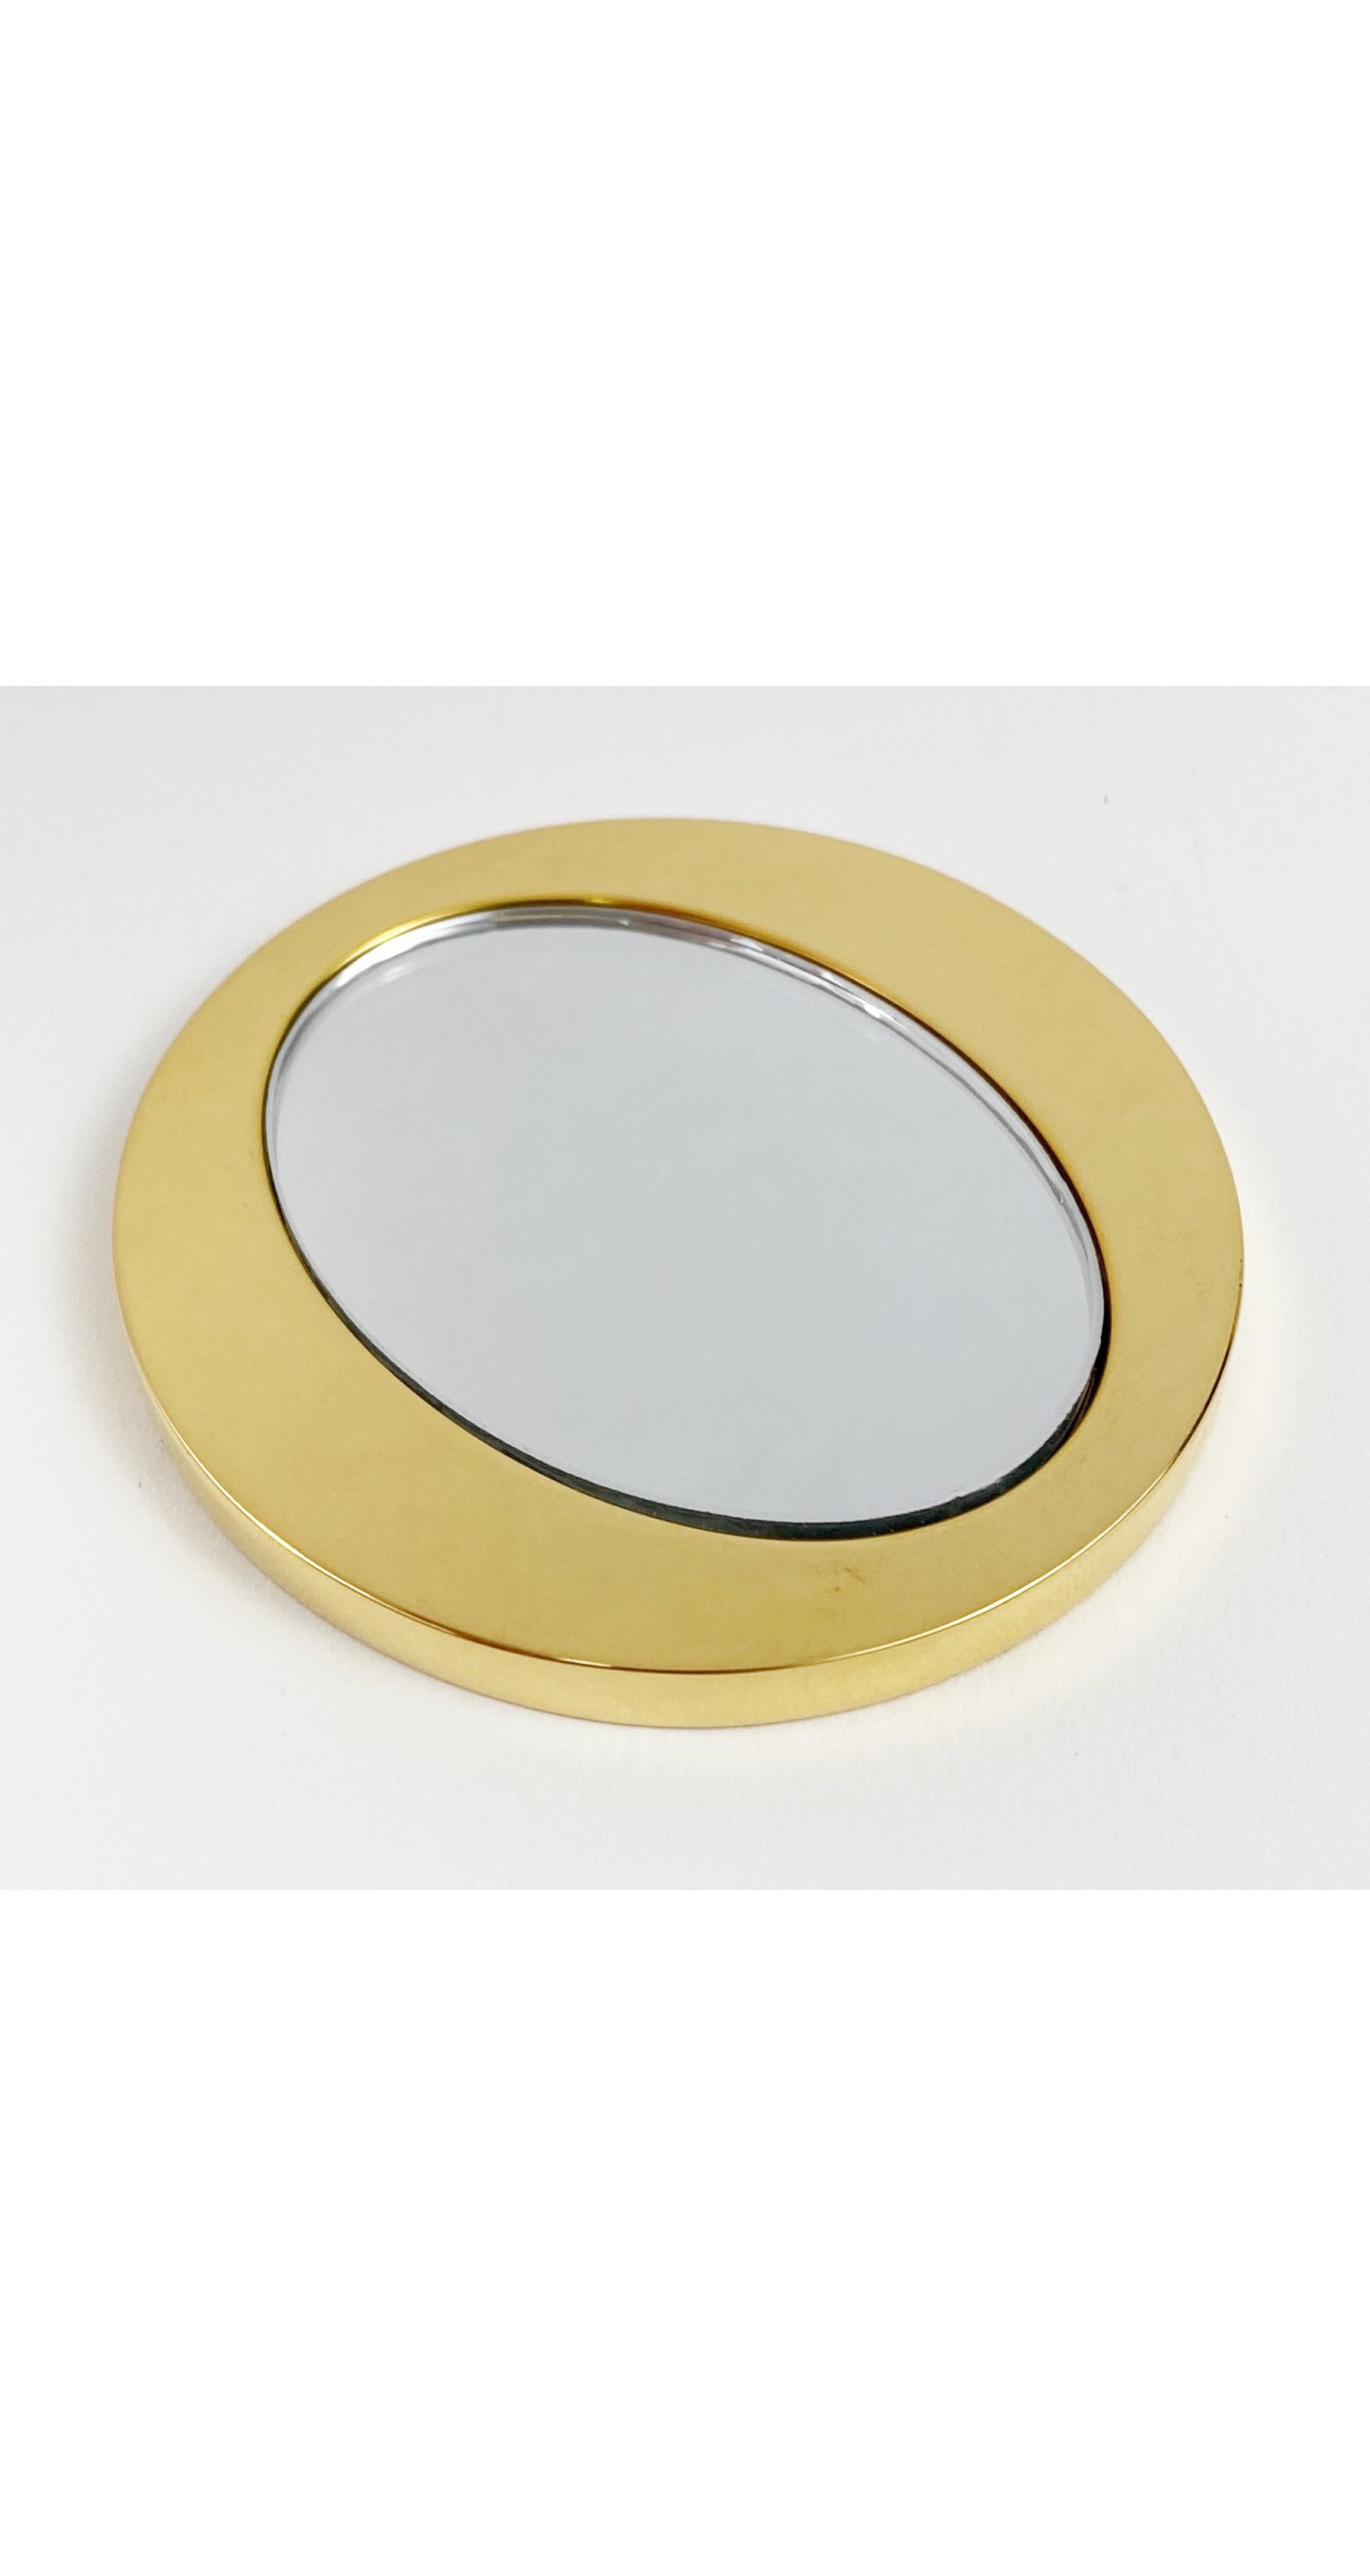 1980s "DIOR" Signed Gold Metal Compact Mirror